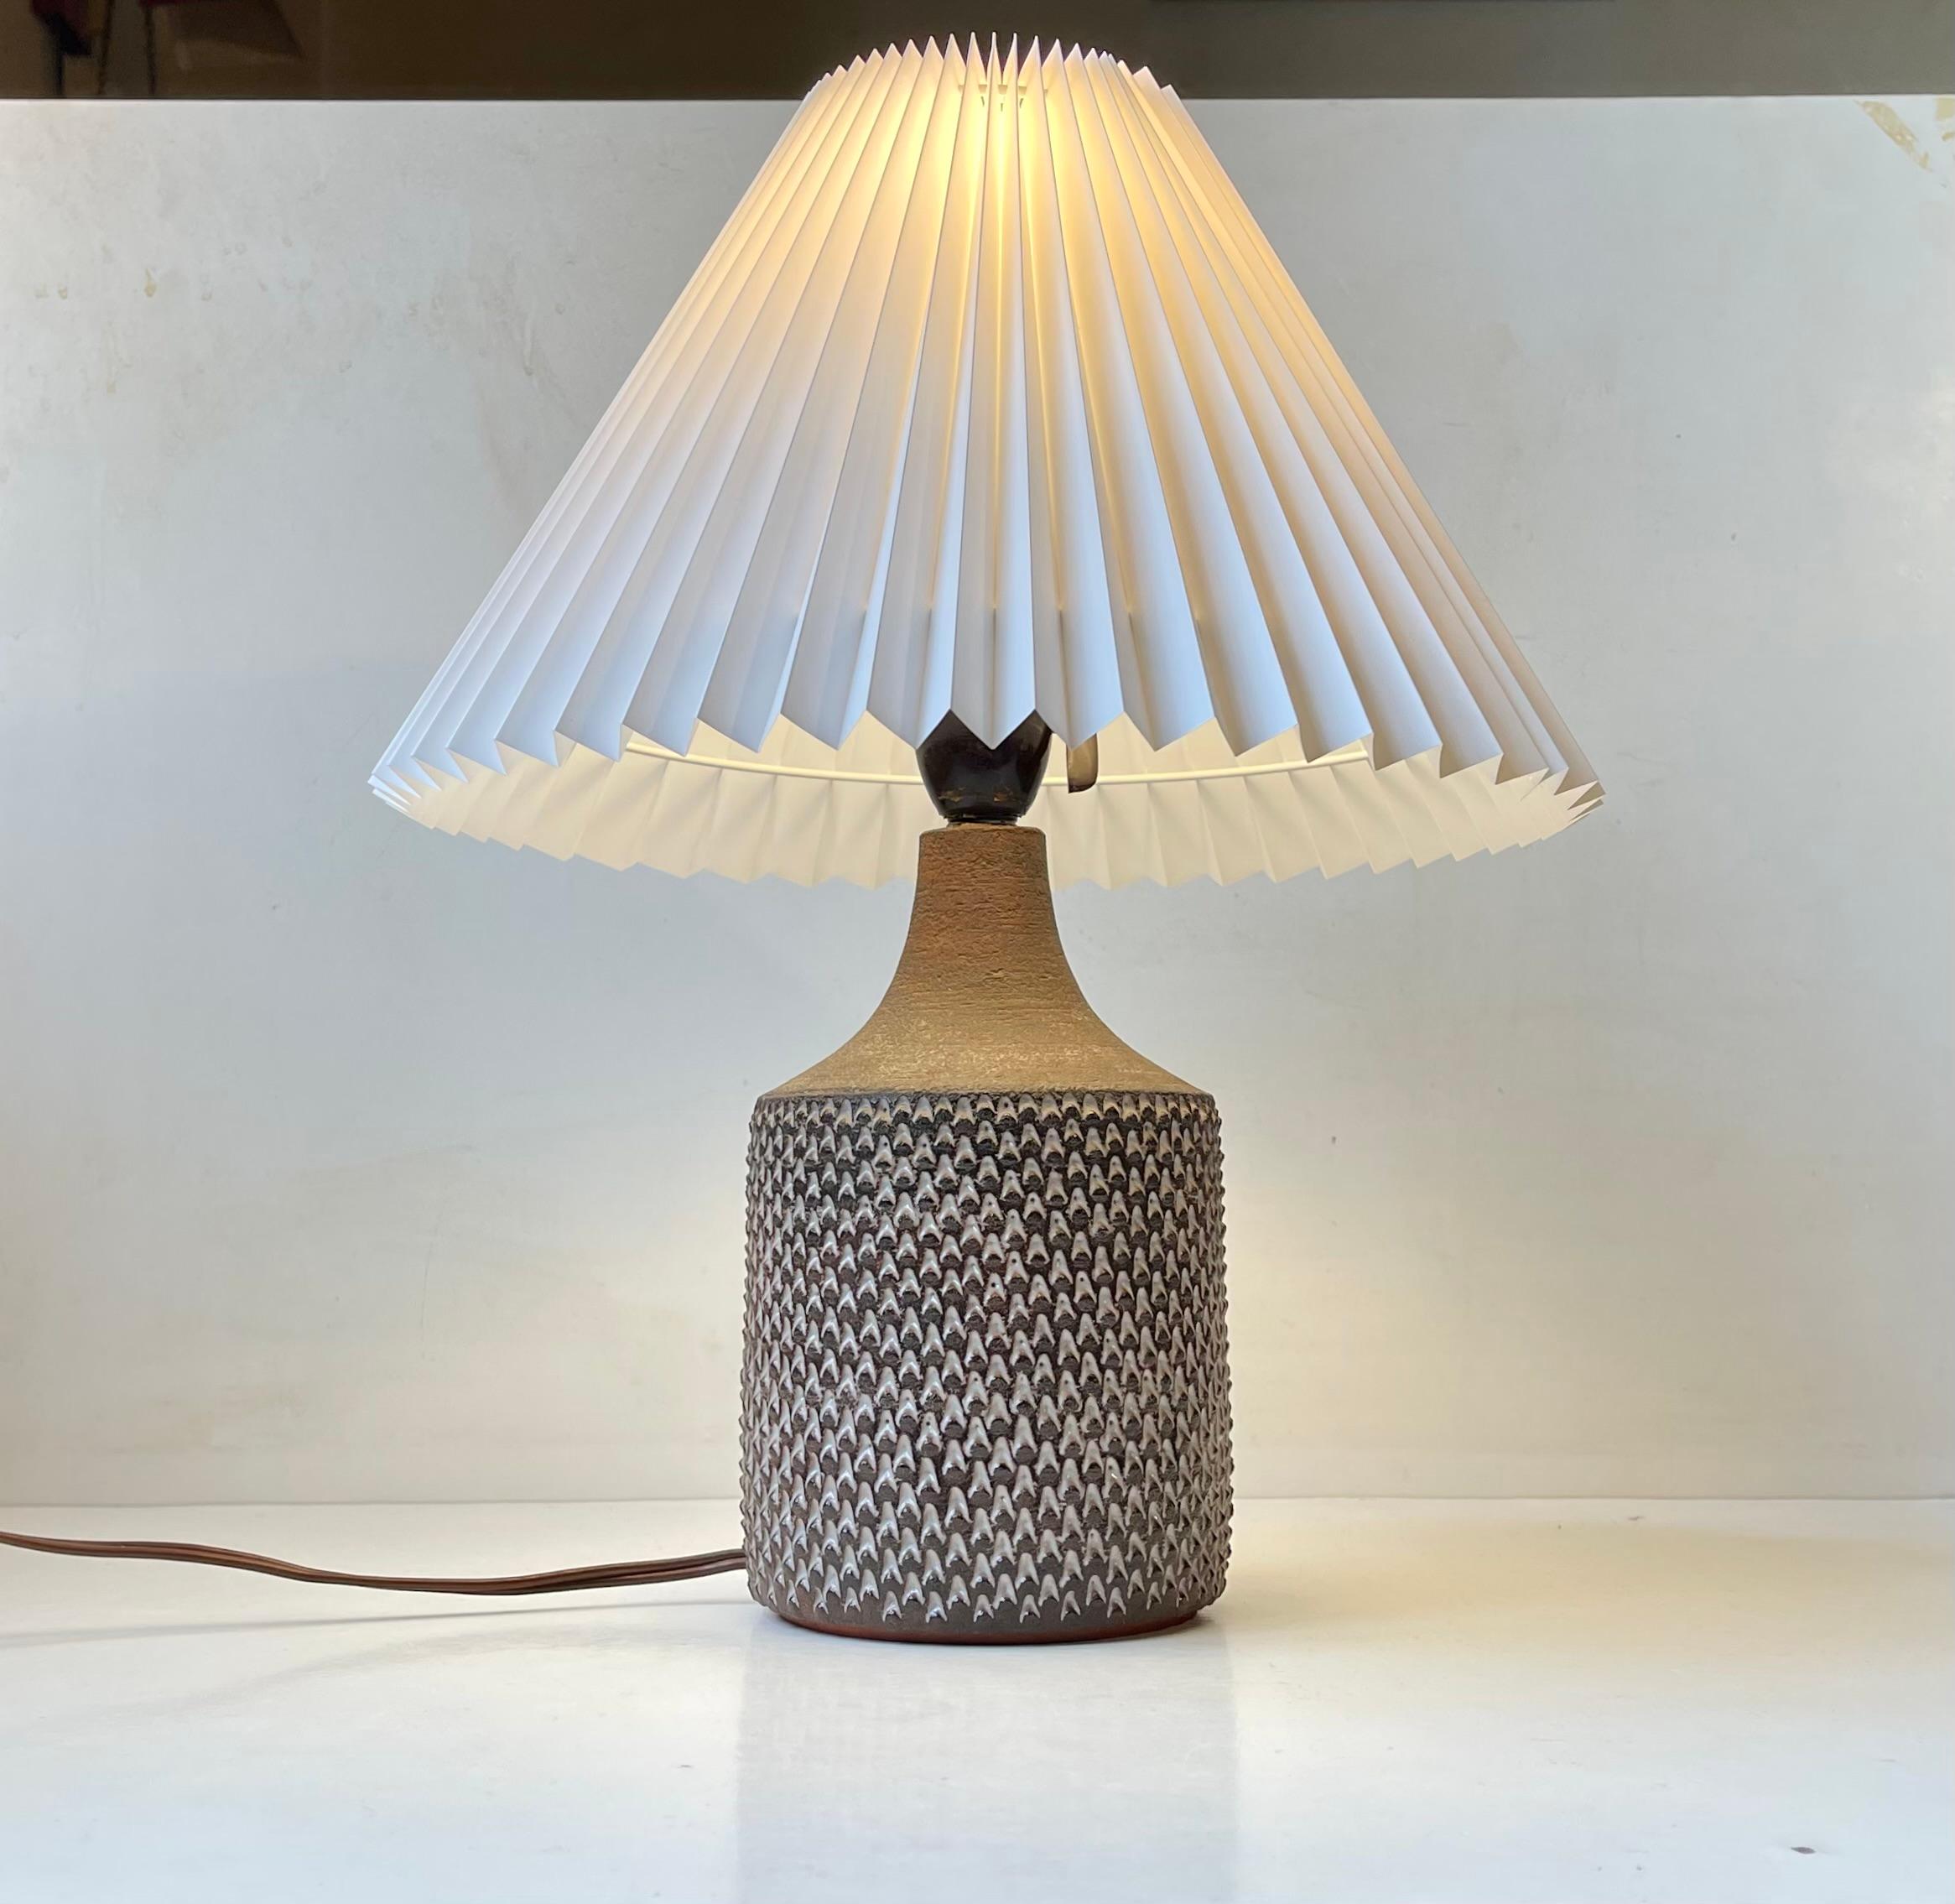 Axel Salto inspired ceramic table lamp by Jytte Trebbien and Harry Nielsen. Micro-buds in brown and white glaze. Its a unique piece made at Tusbo keramik in Denmark circa 1970. It features its original bakelite socket with on/of switch and comes